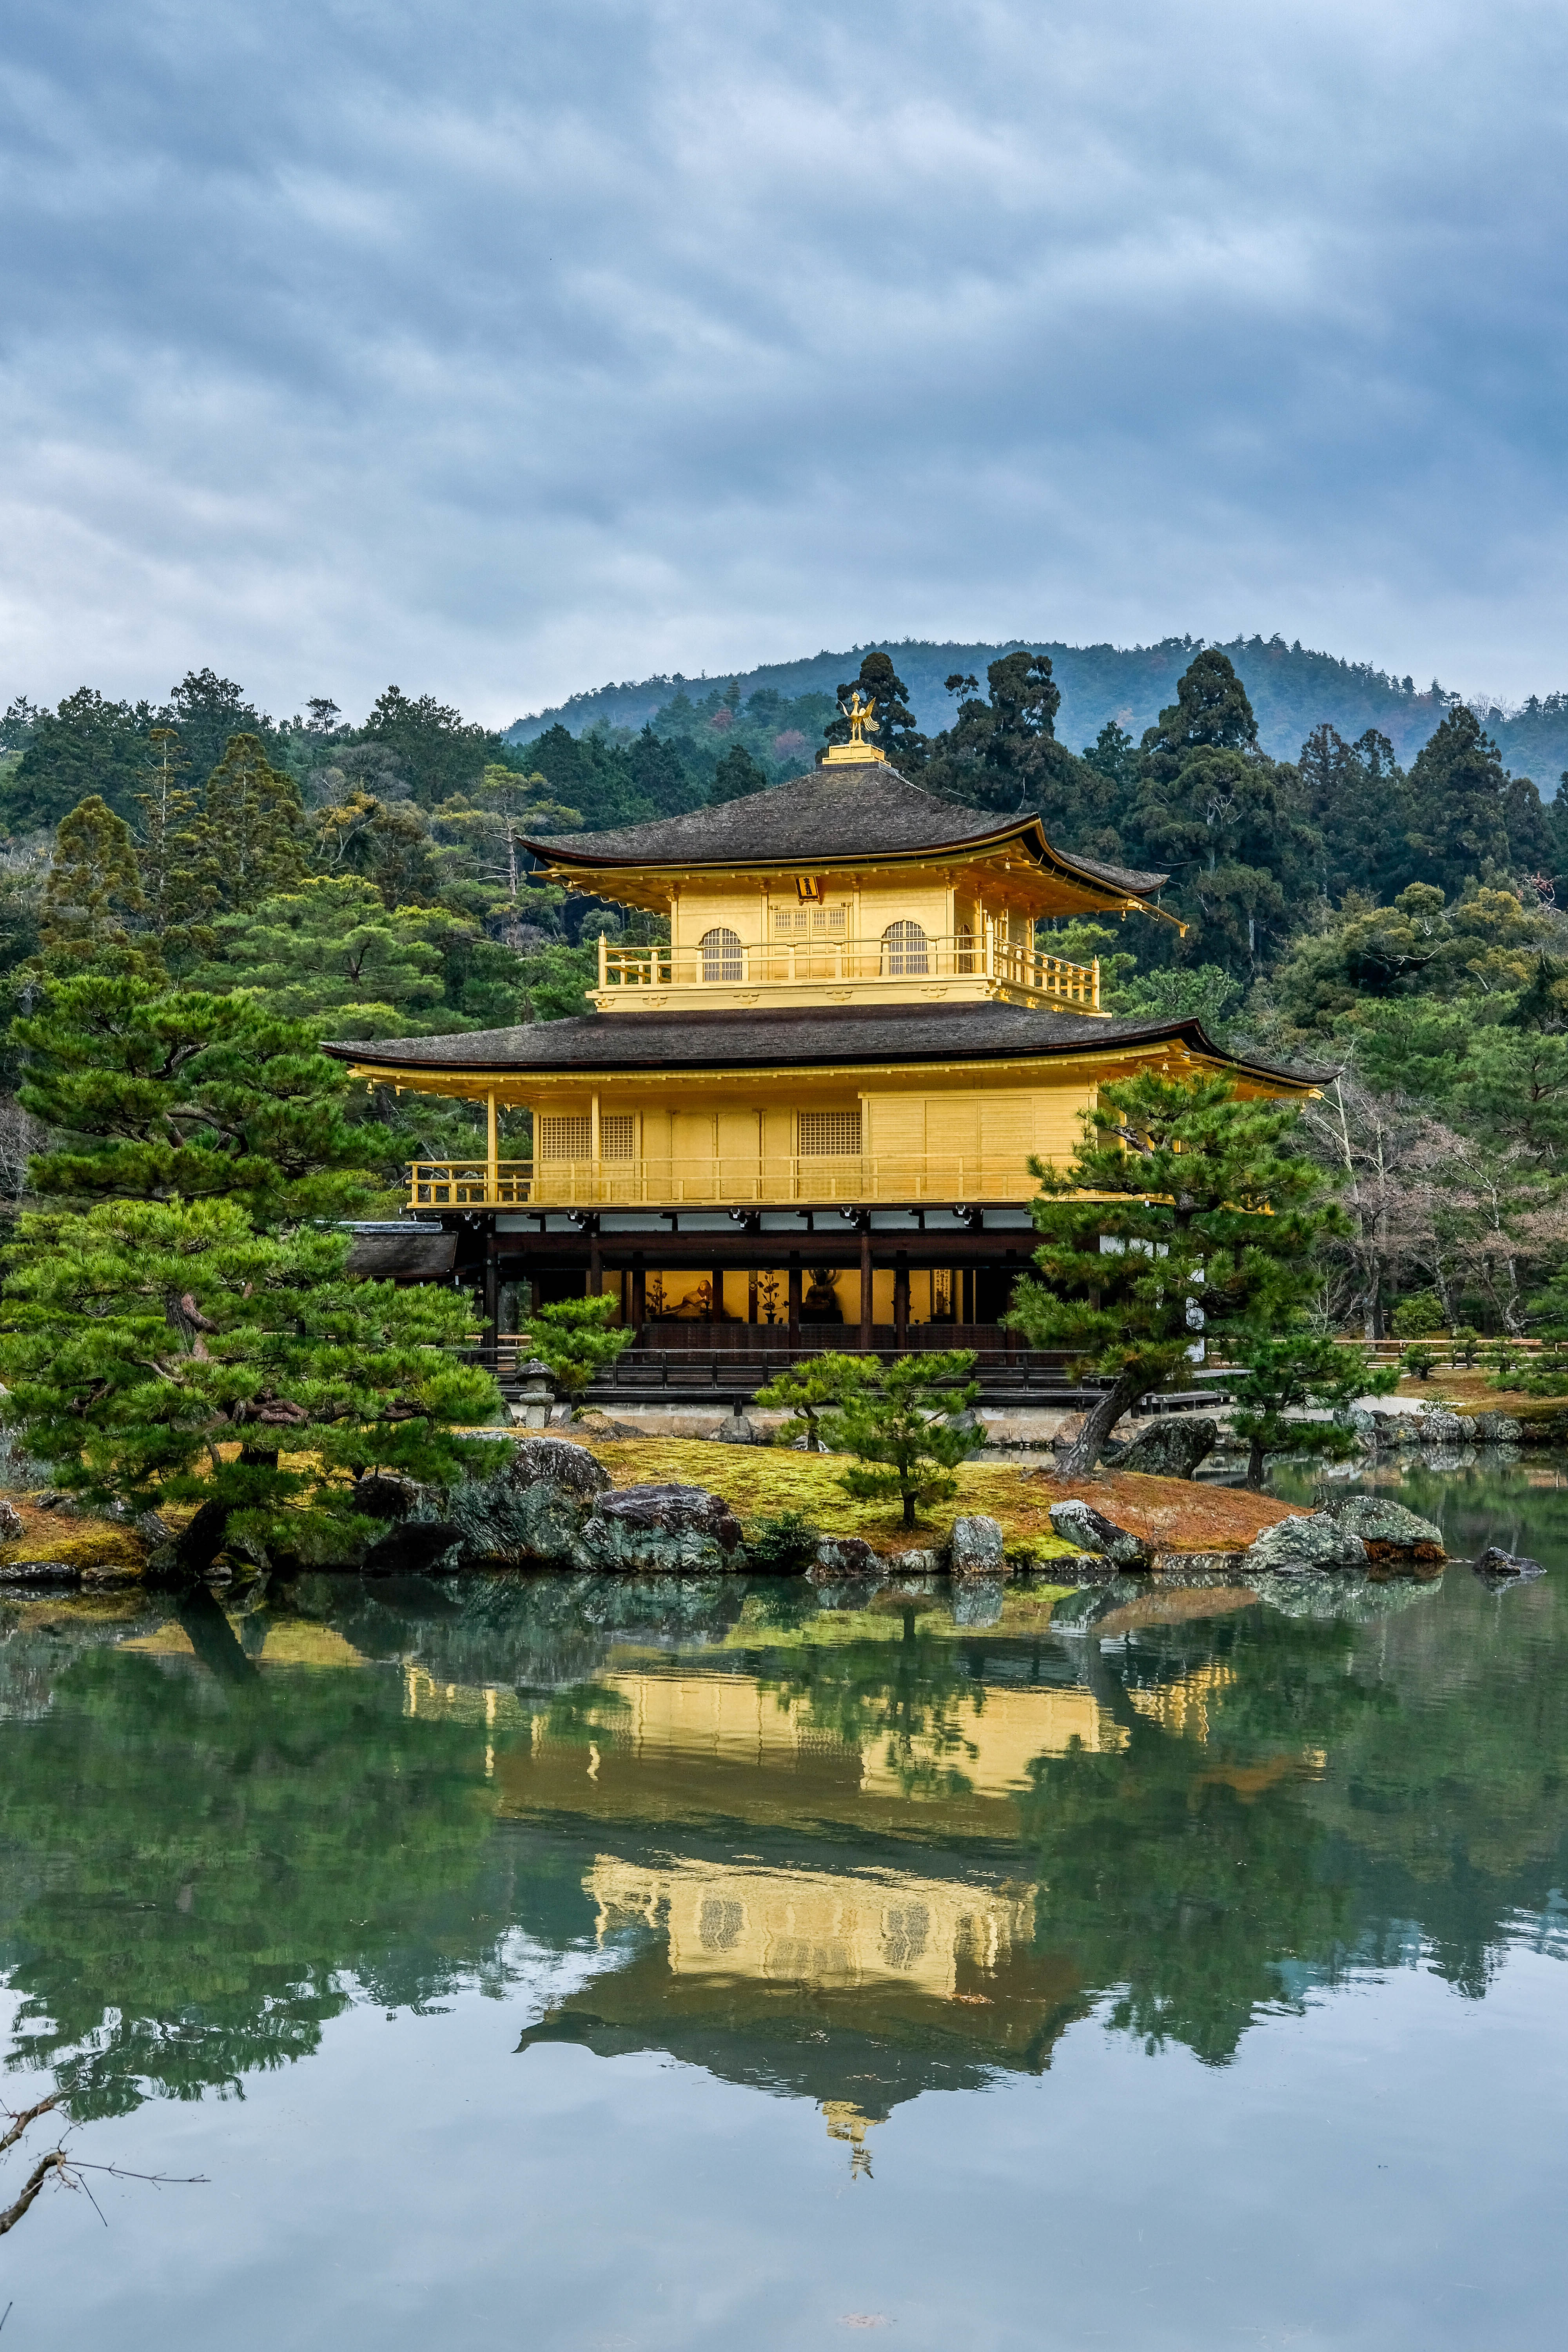 japan, nature, architecture, building, reflection, pagoda, temple